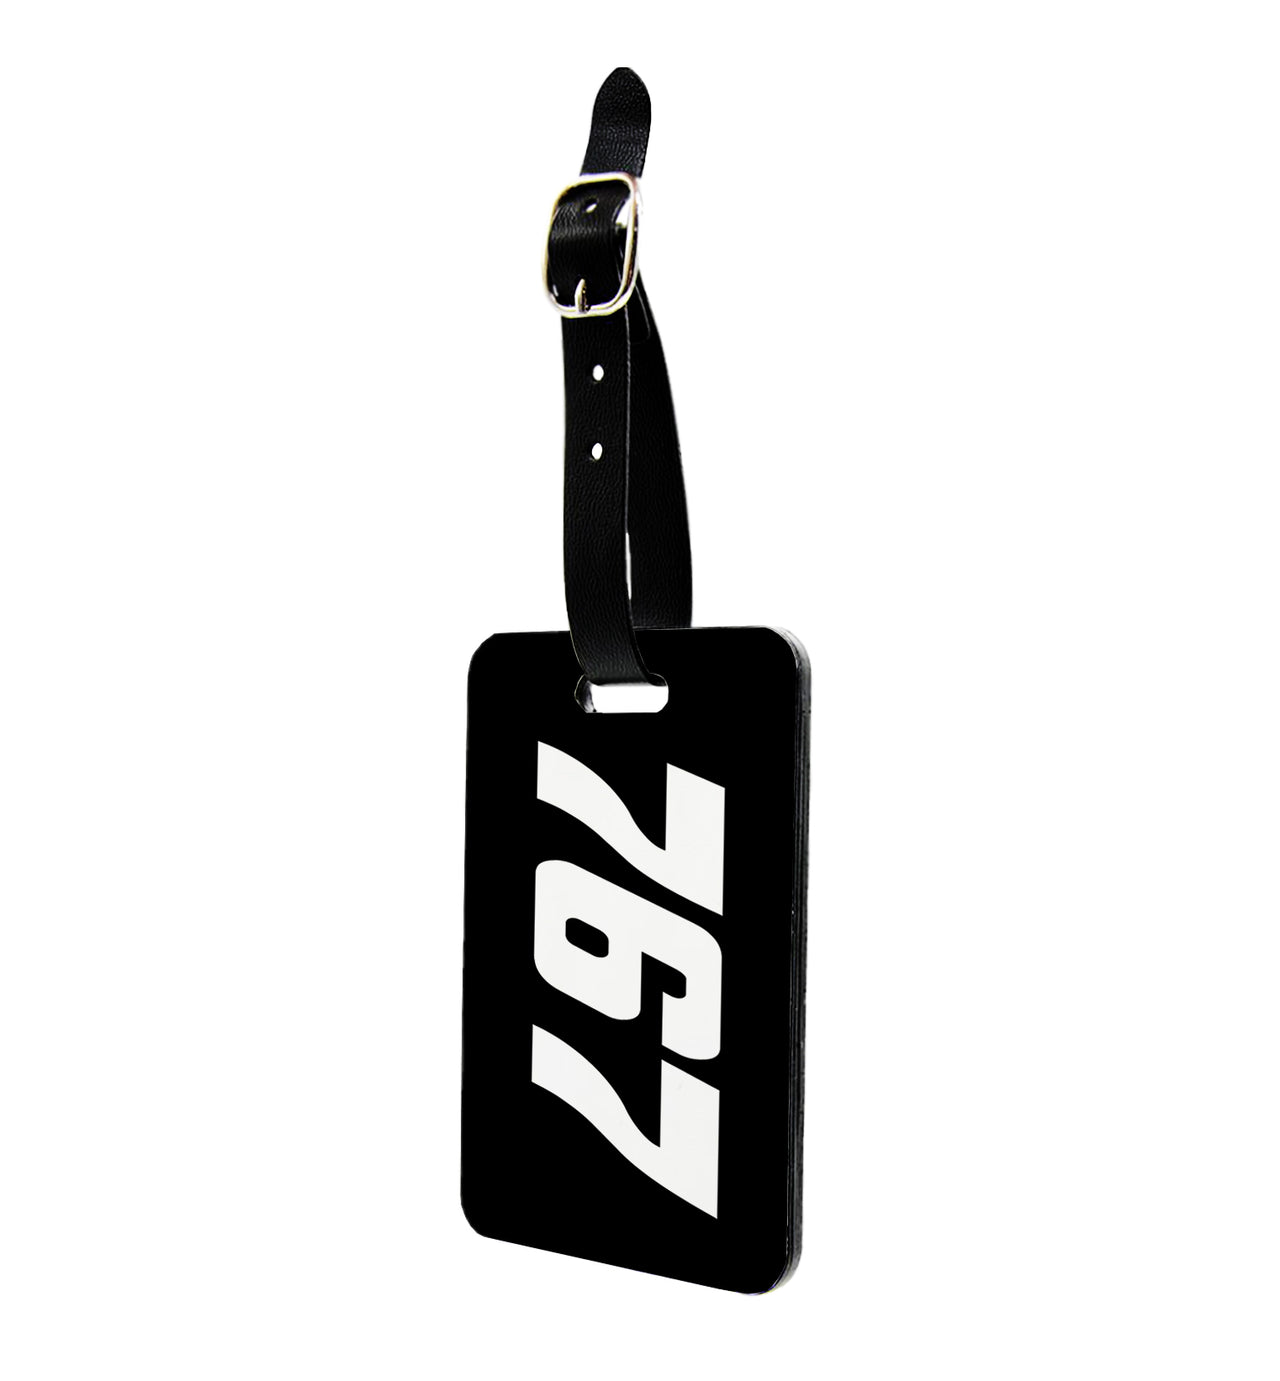 Boeing 767 Text Designed Luggage Tag